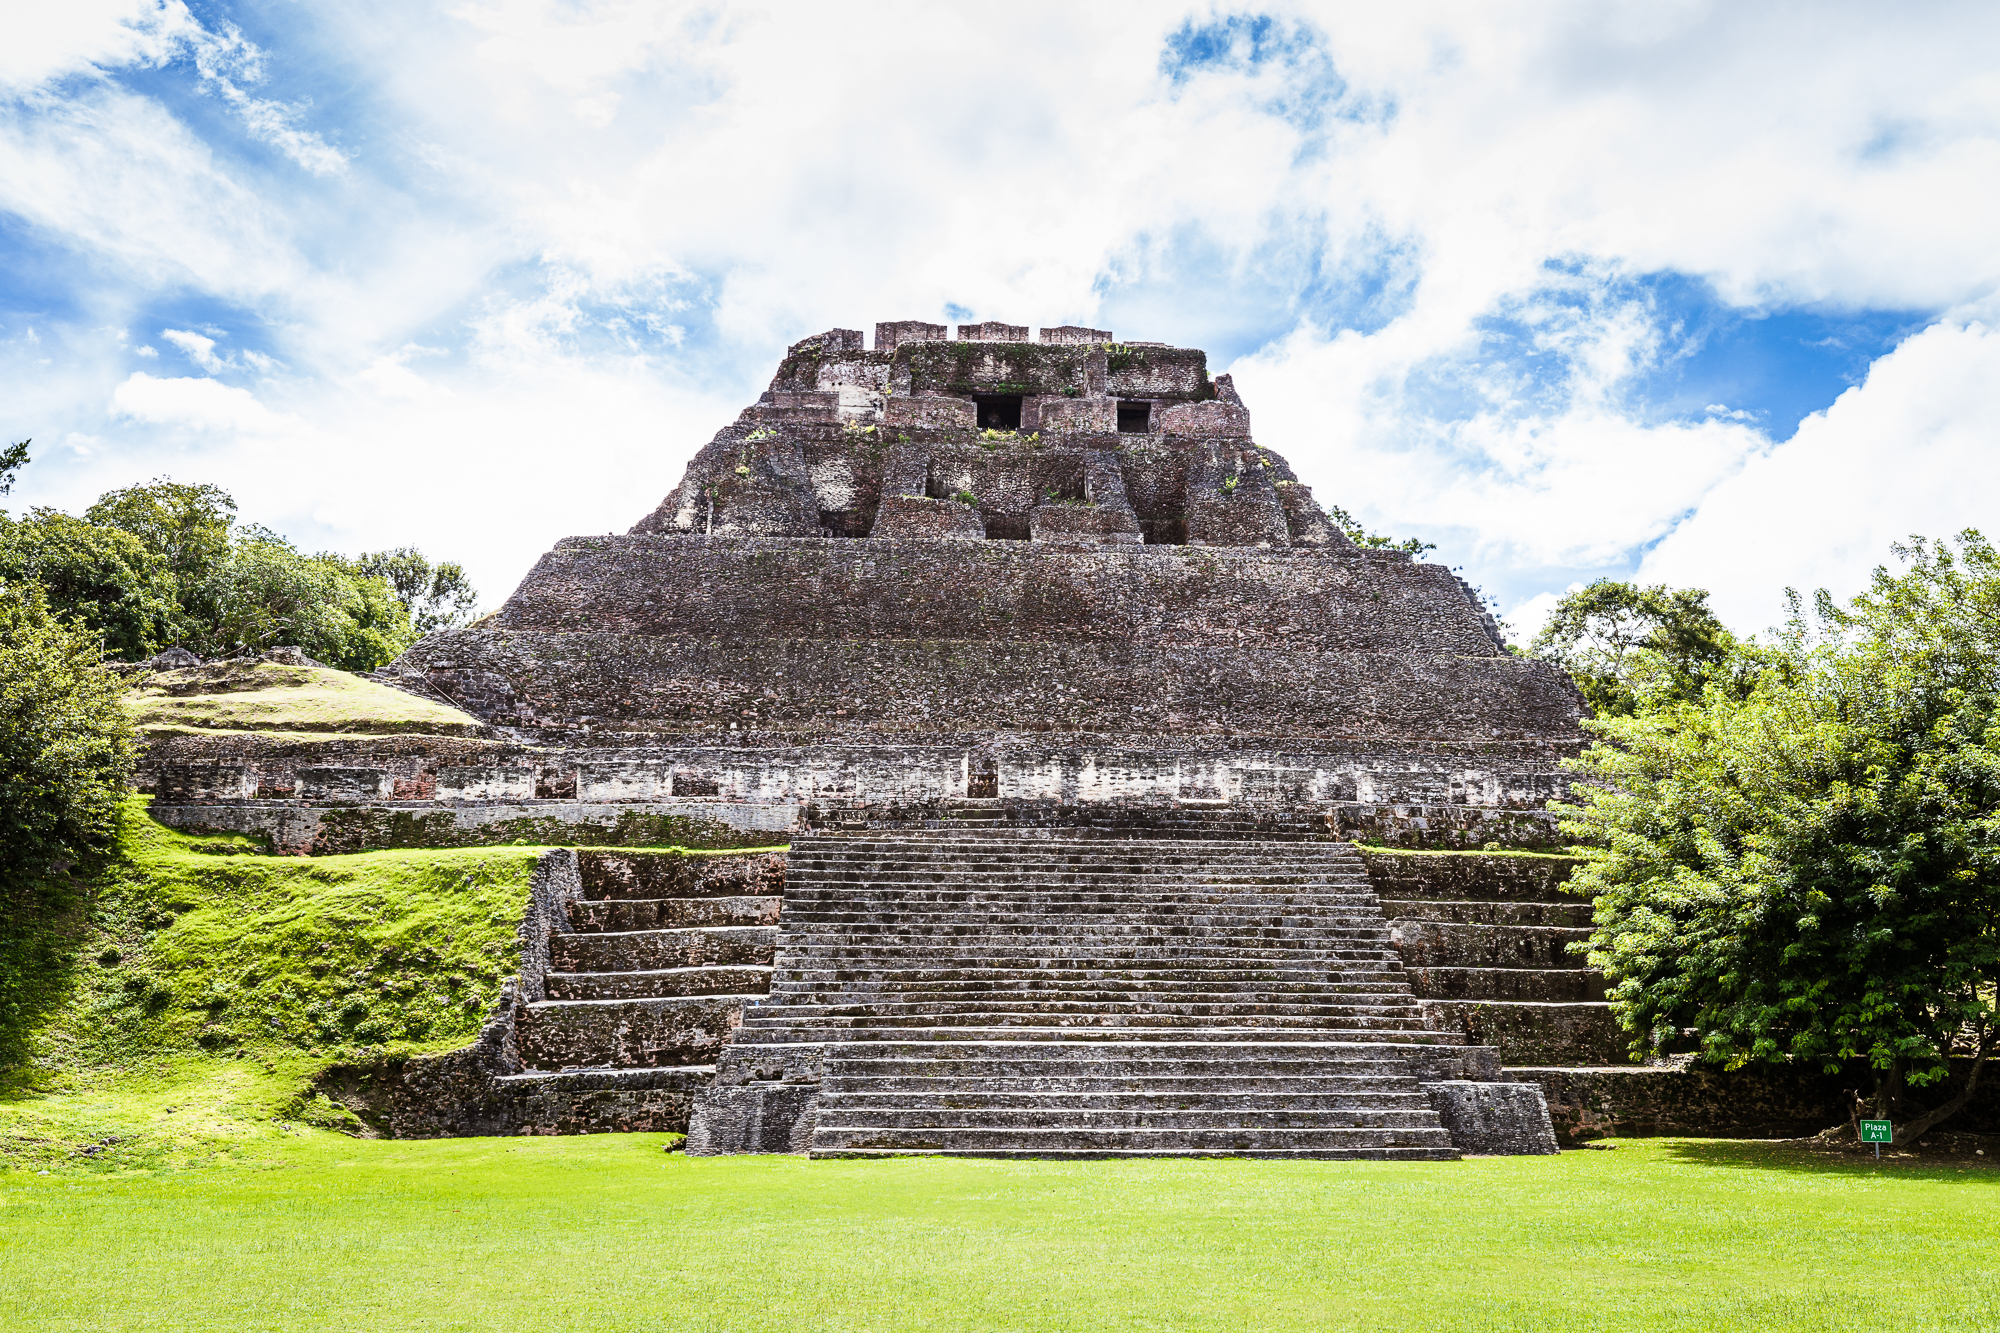 belize travel guide, what to do in belize, what to wear in belize, where to stay in belize, belmopan belize, sleeping giant resort review, the rainforest lodge at sleeping giant review, xunantunich belize, blue hole belize, horseback riding belize, mayan ruins belize, pyramids in belize